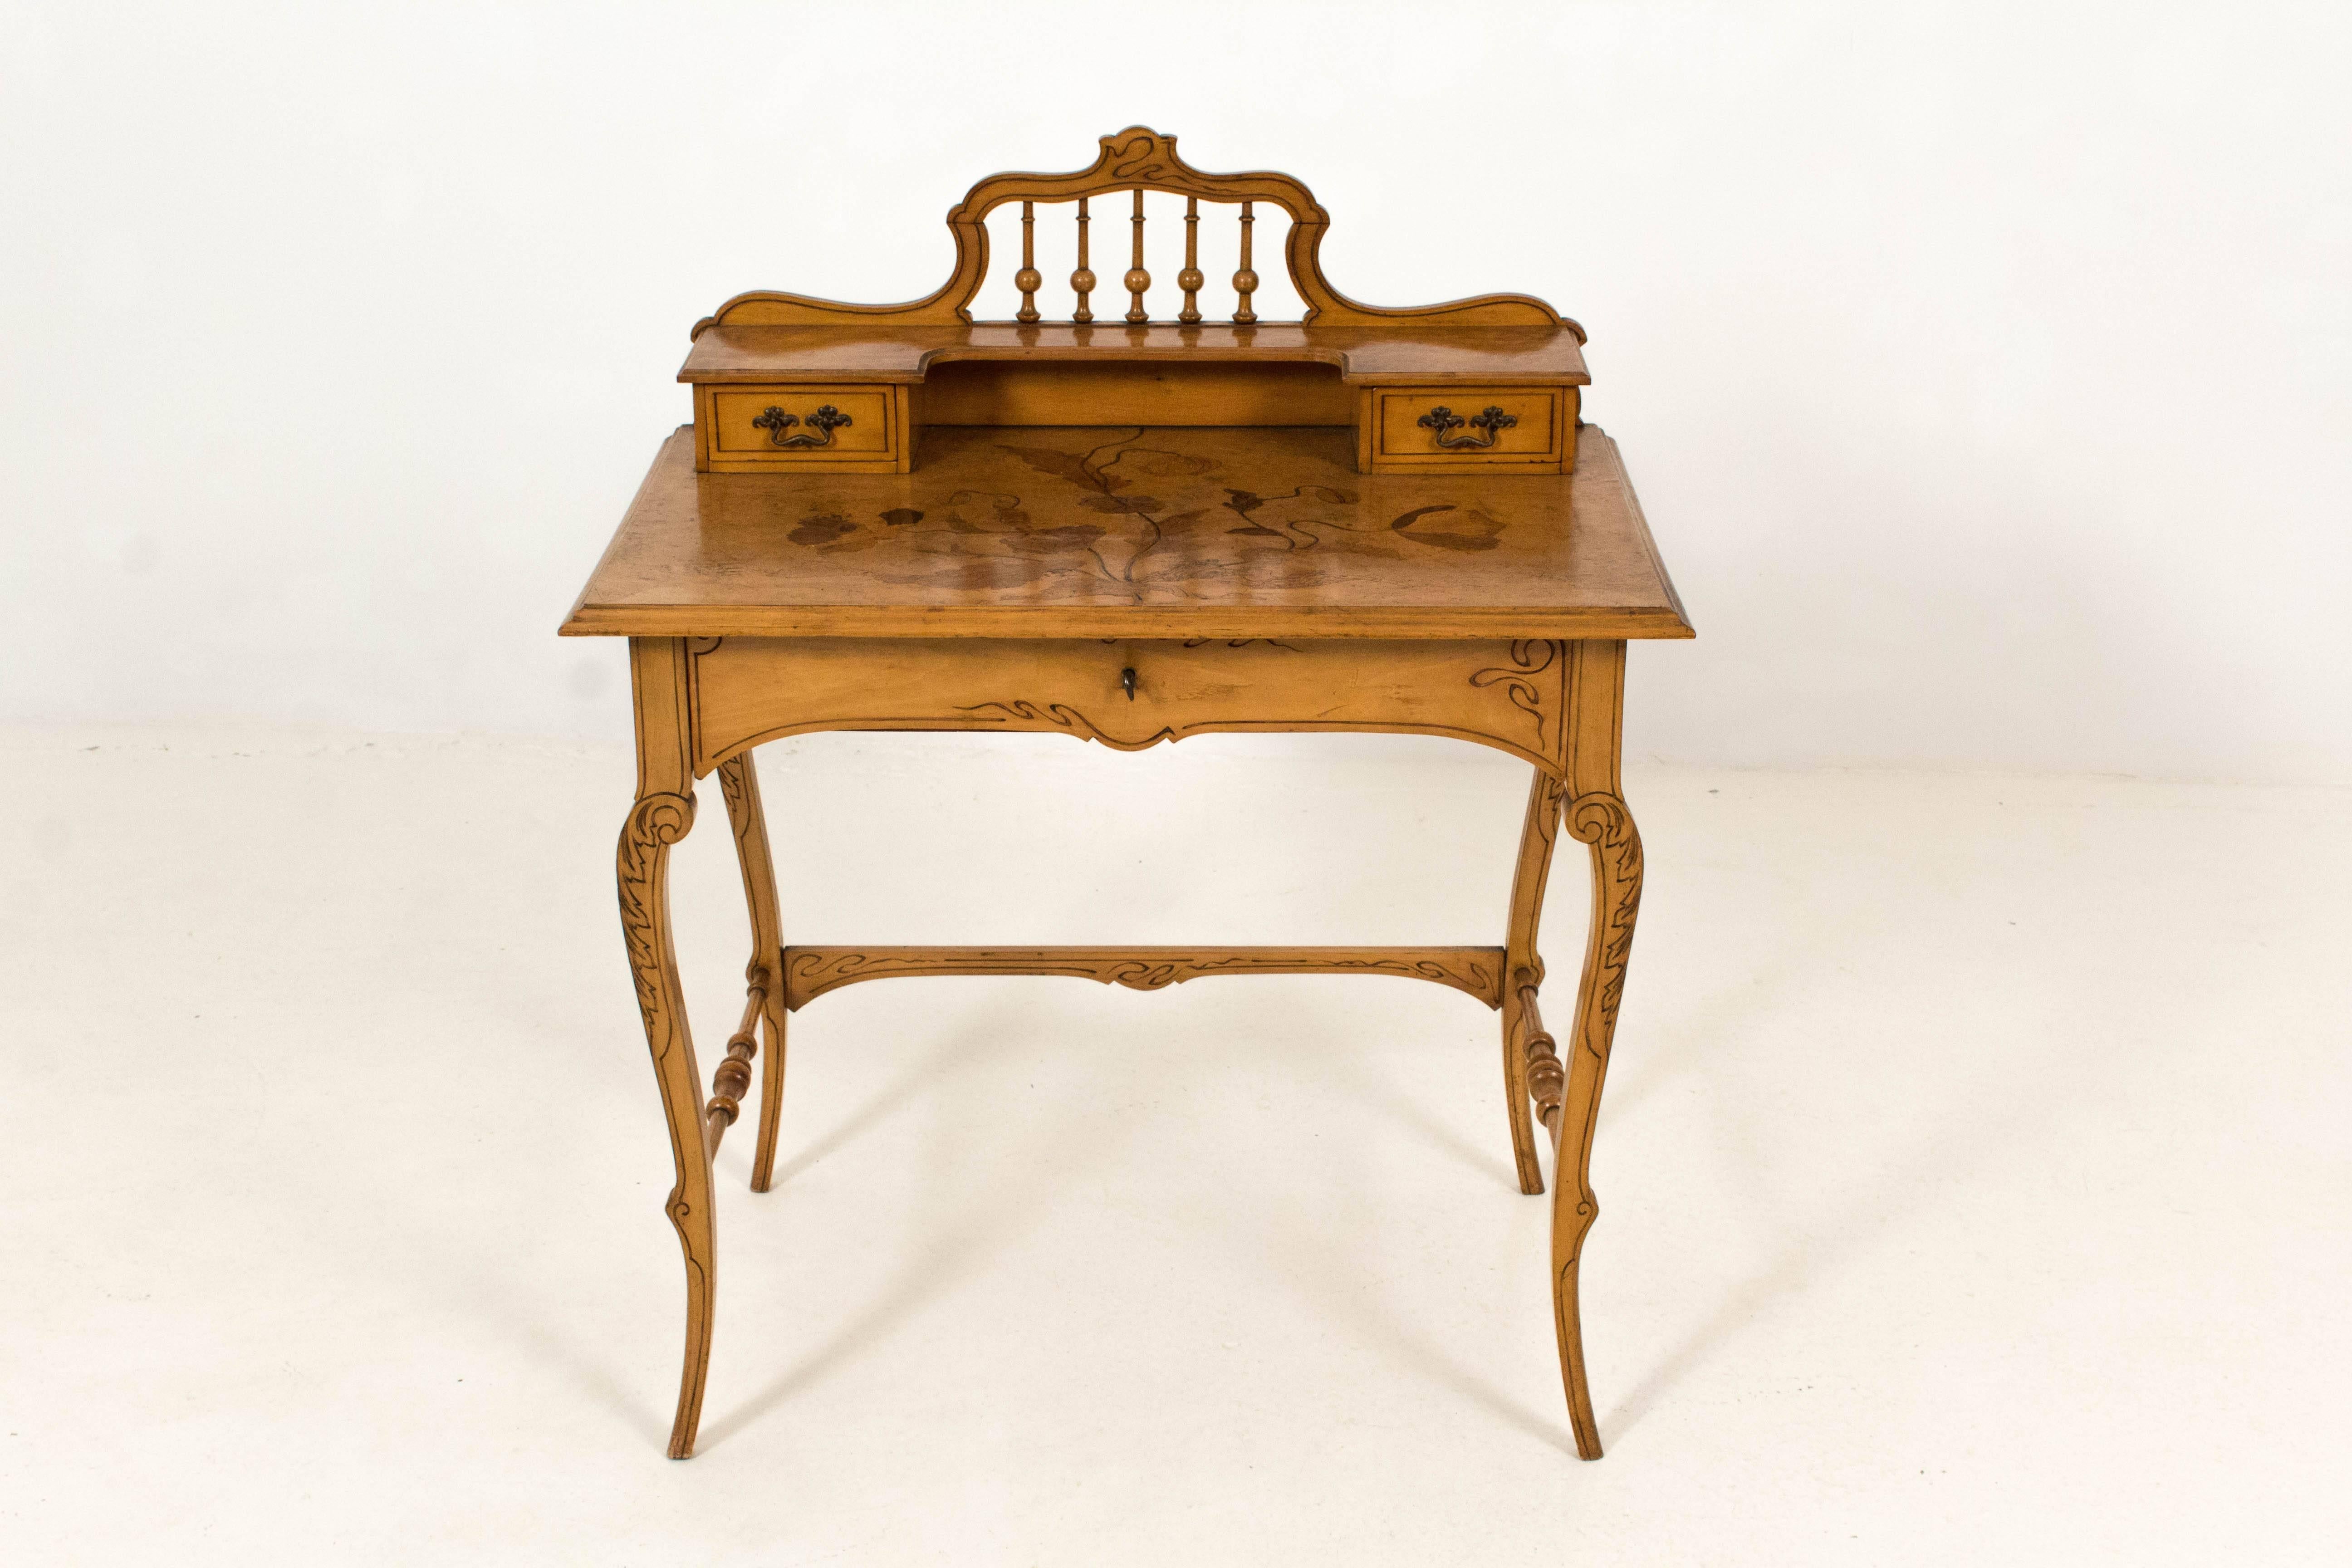 Stunning French Art Nouveau writing table with marquetry, 1900s.
Walnut or Ash with three original drawers.
In good original condition with minor wear consistent with age and use,
preserving a beautiful patina.
   